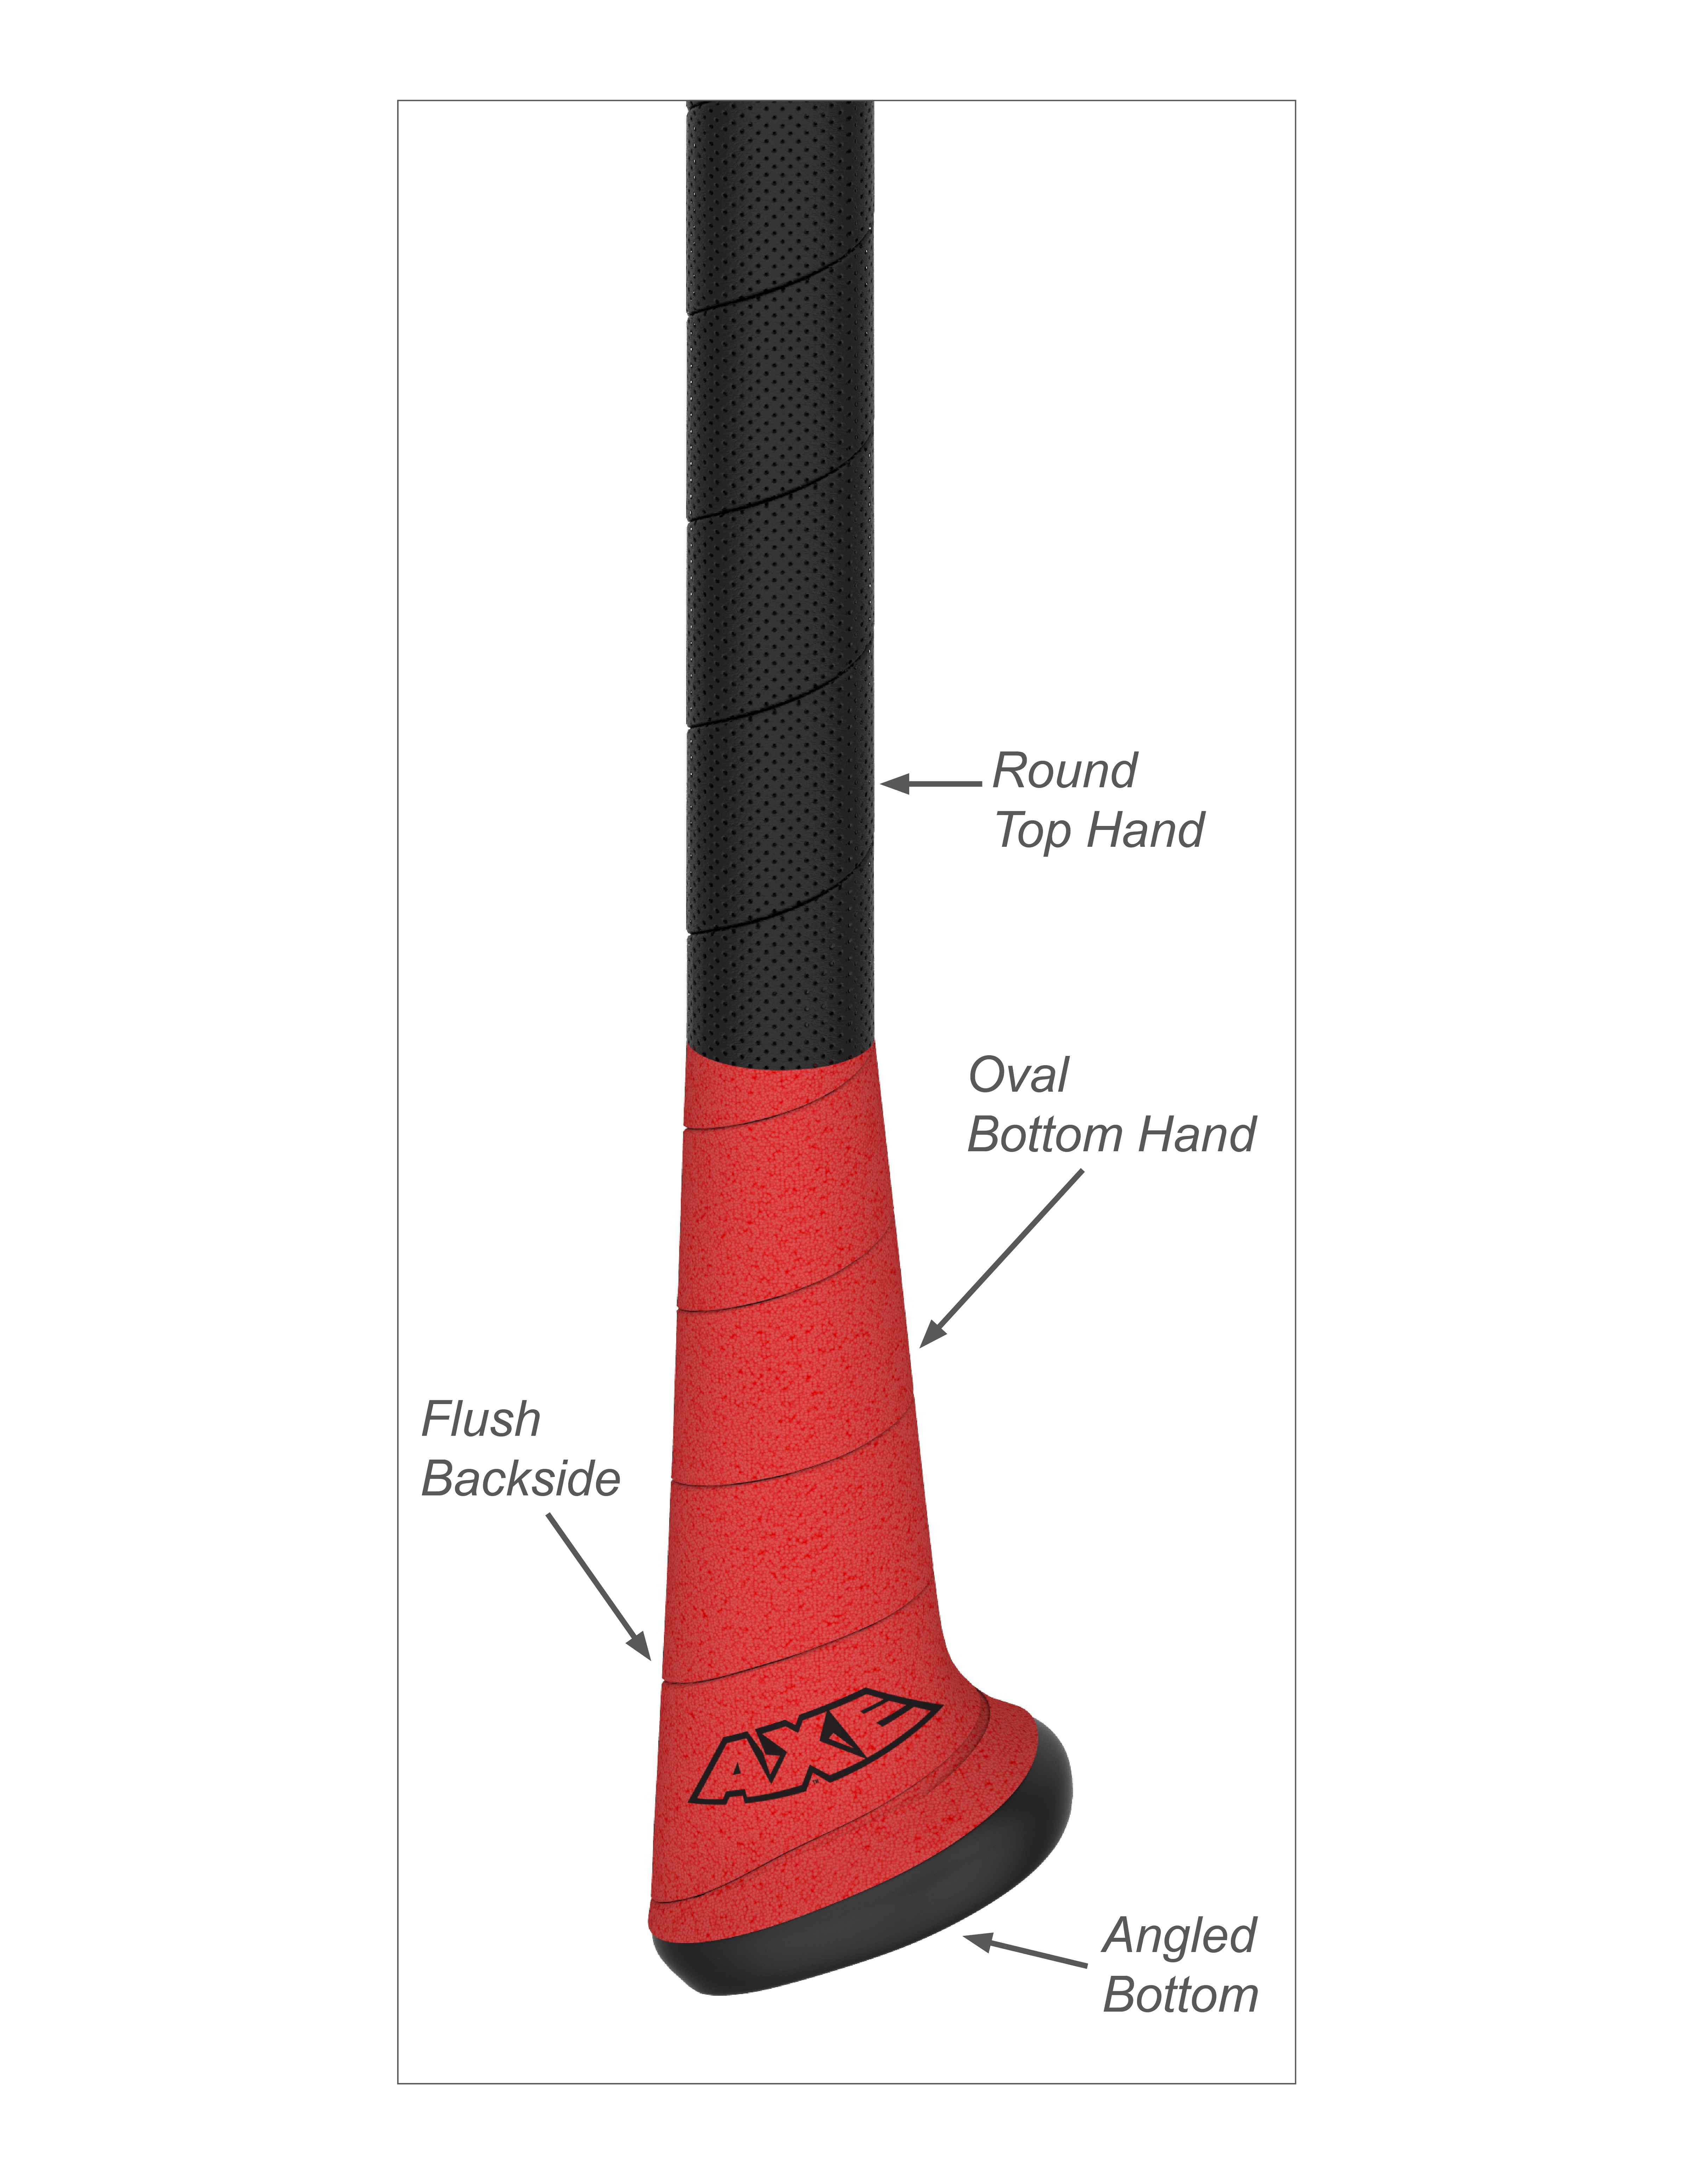 Axe Bat's patented handle enables a more stable grip for maximum bat speed and more barrel control.